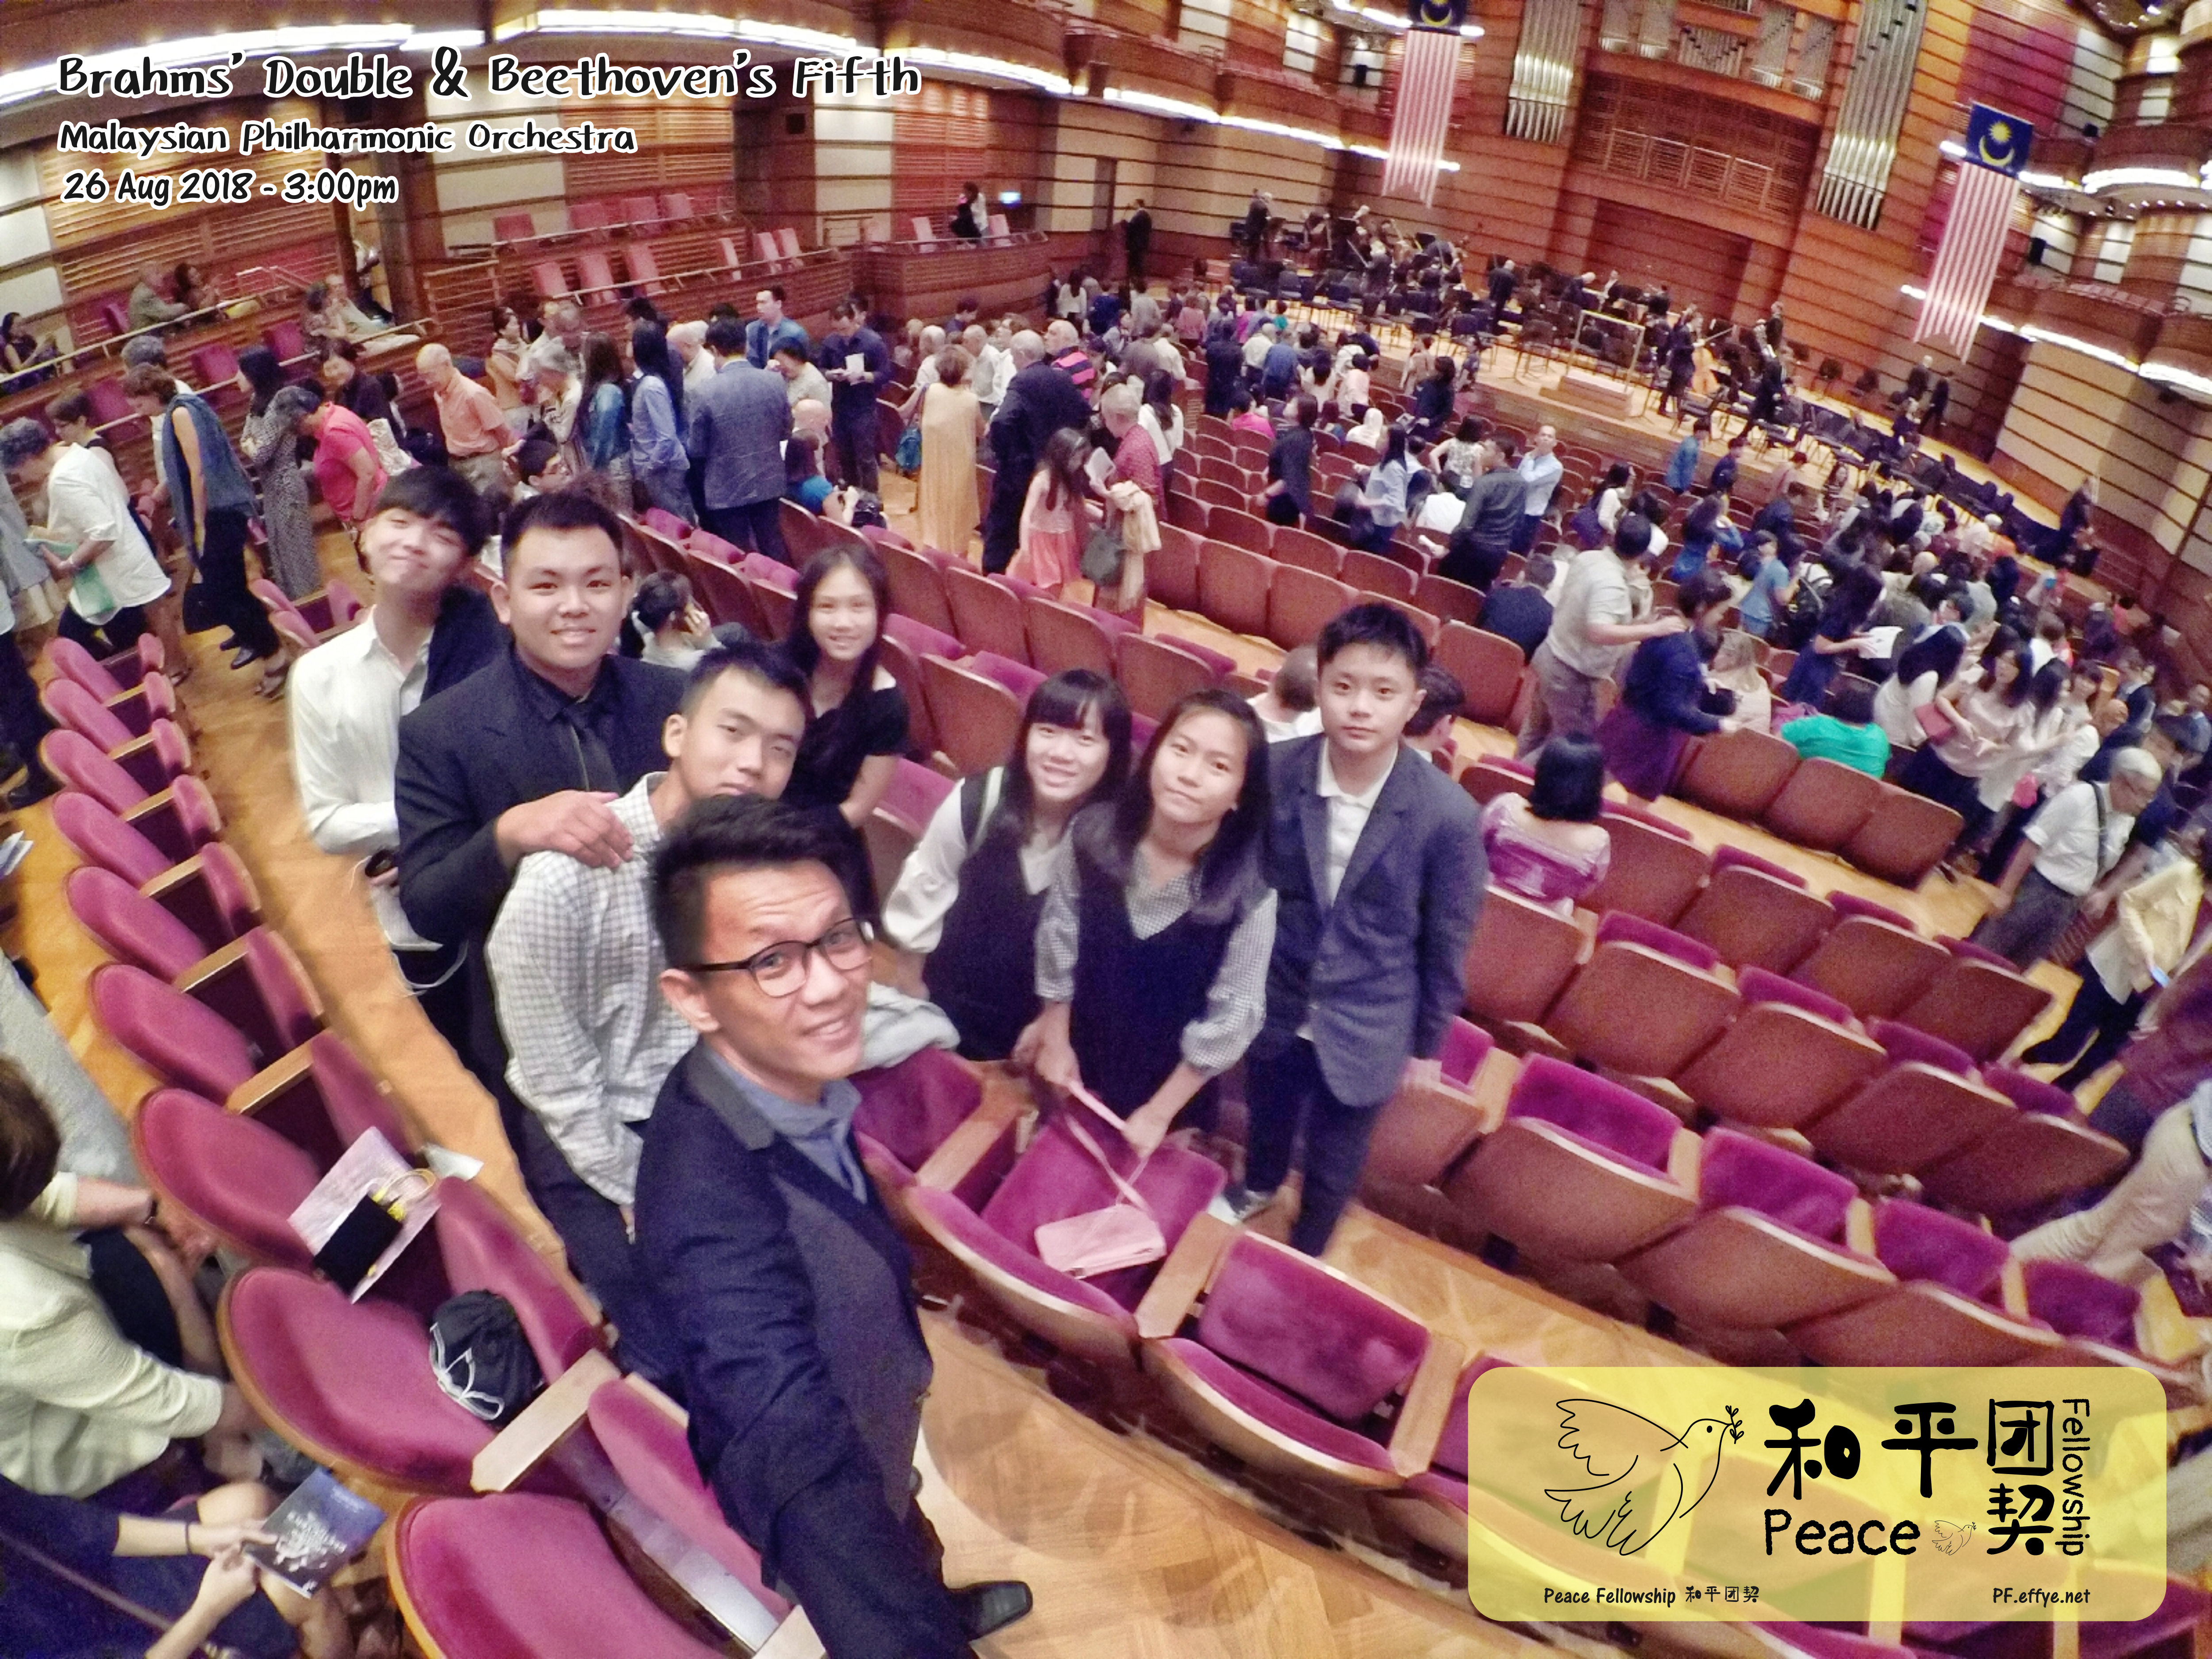 Peace Fellowship 和平团契 参加 Brahms Double & Beethovens Fifth Malaysia Philharmonic Orchestra Concert 26 Aug 2018 Petronas Twin Towers B002